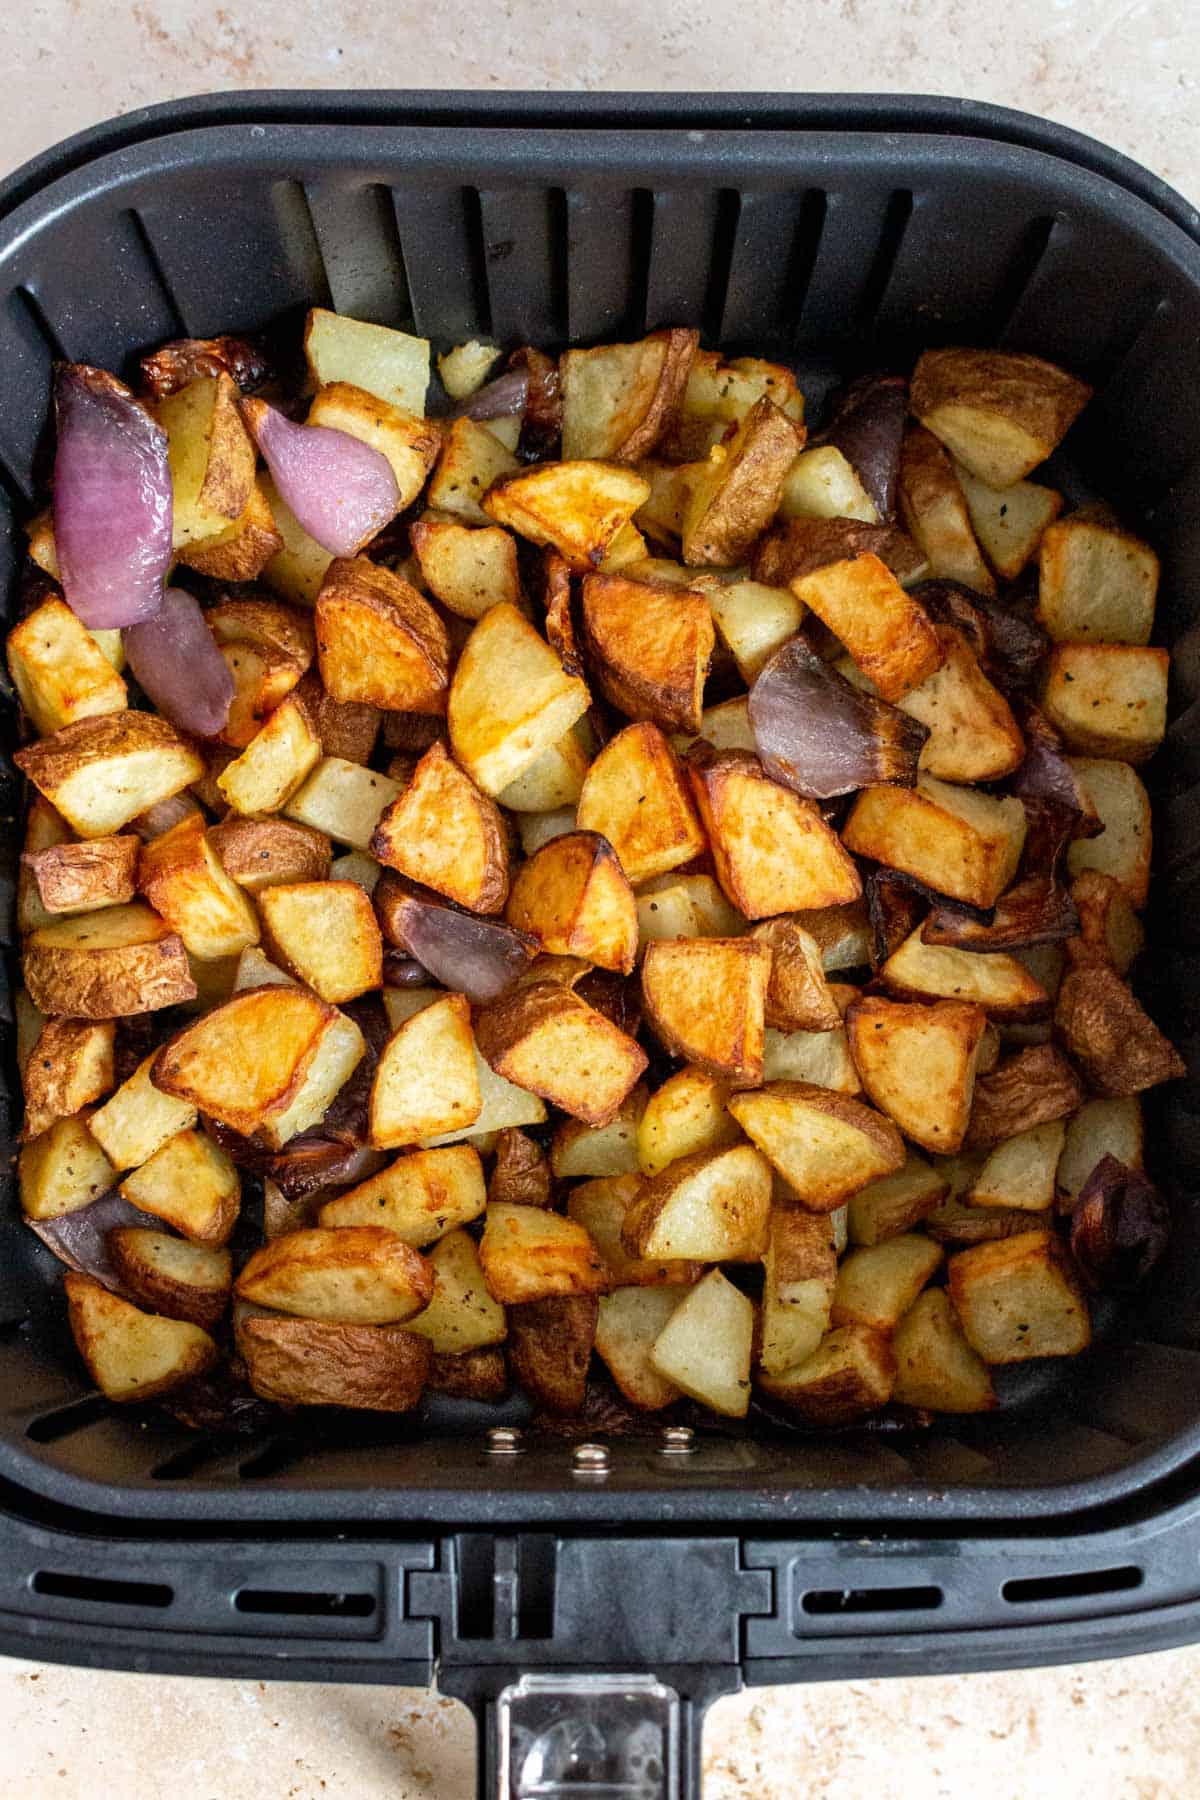 A close up view of potatoes and onions in an air fryer basket.